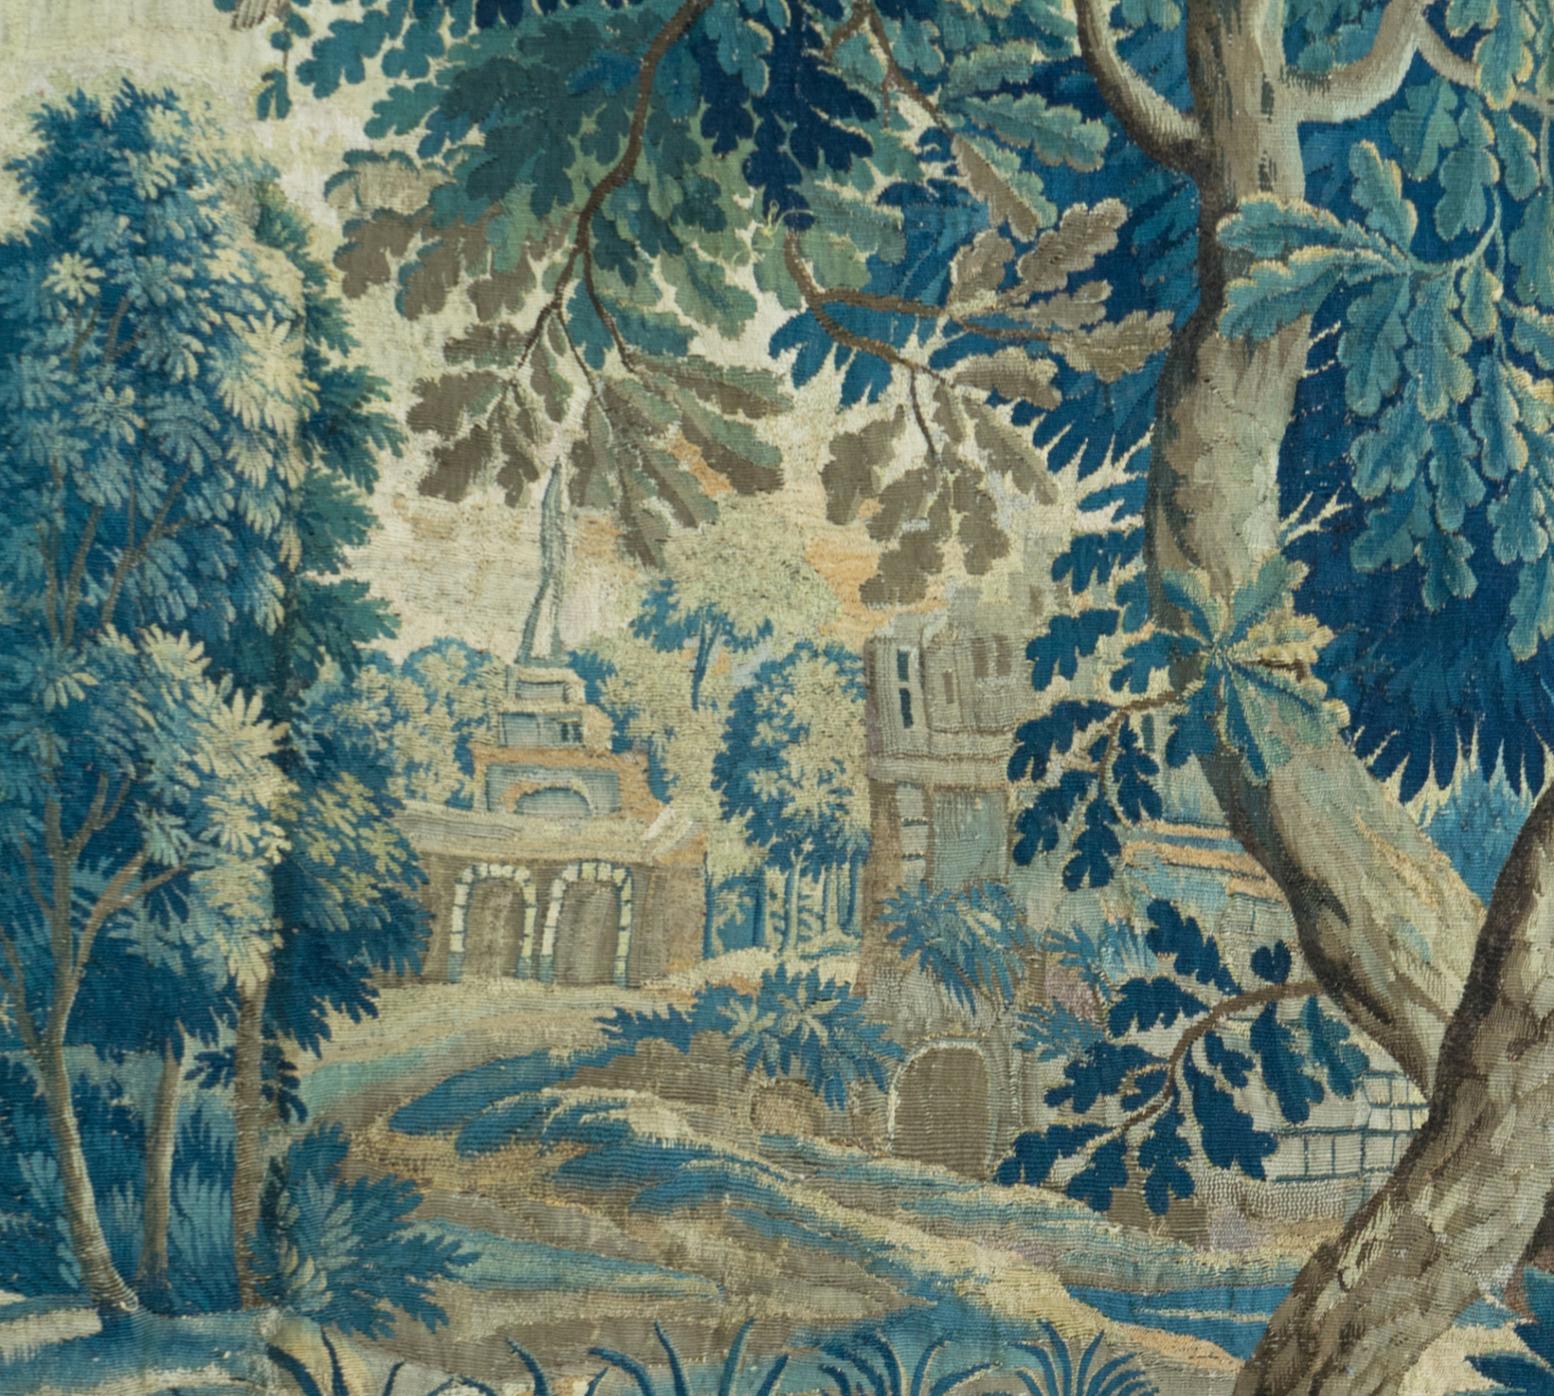 This is a gorgeous antique square 18th century flemish verdure landscape tapestry with birds depicting a beautiful and rich summer scene of a countryside with lush trees and vegetation, roosters, birds feeding their young, and homes in the distance.